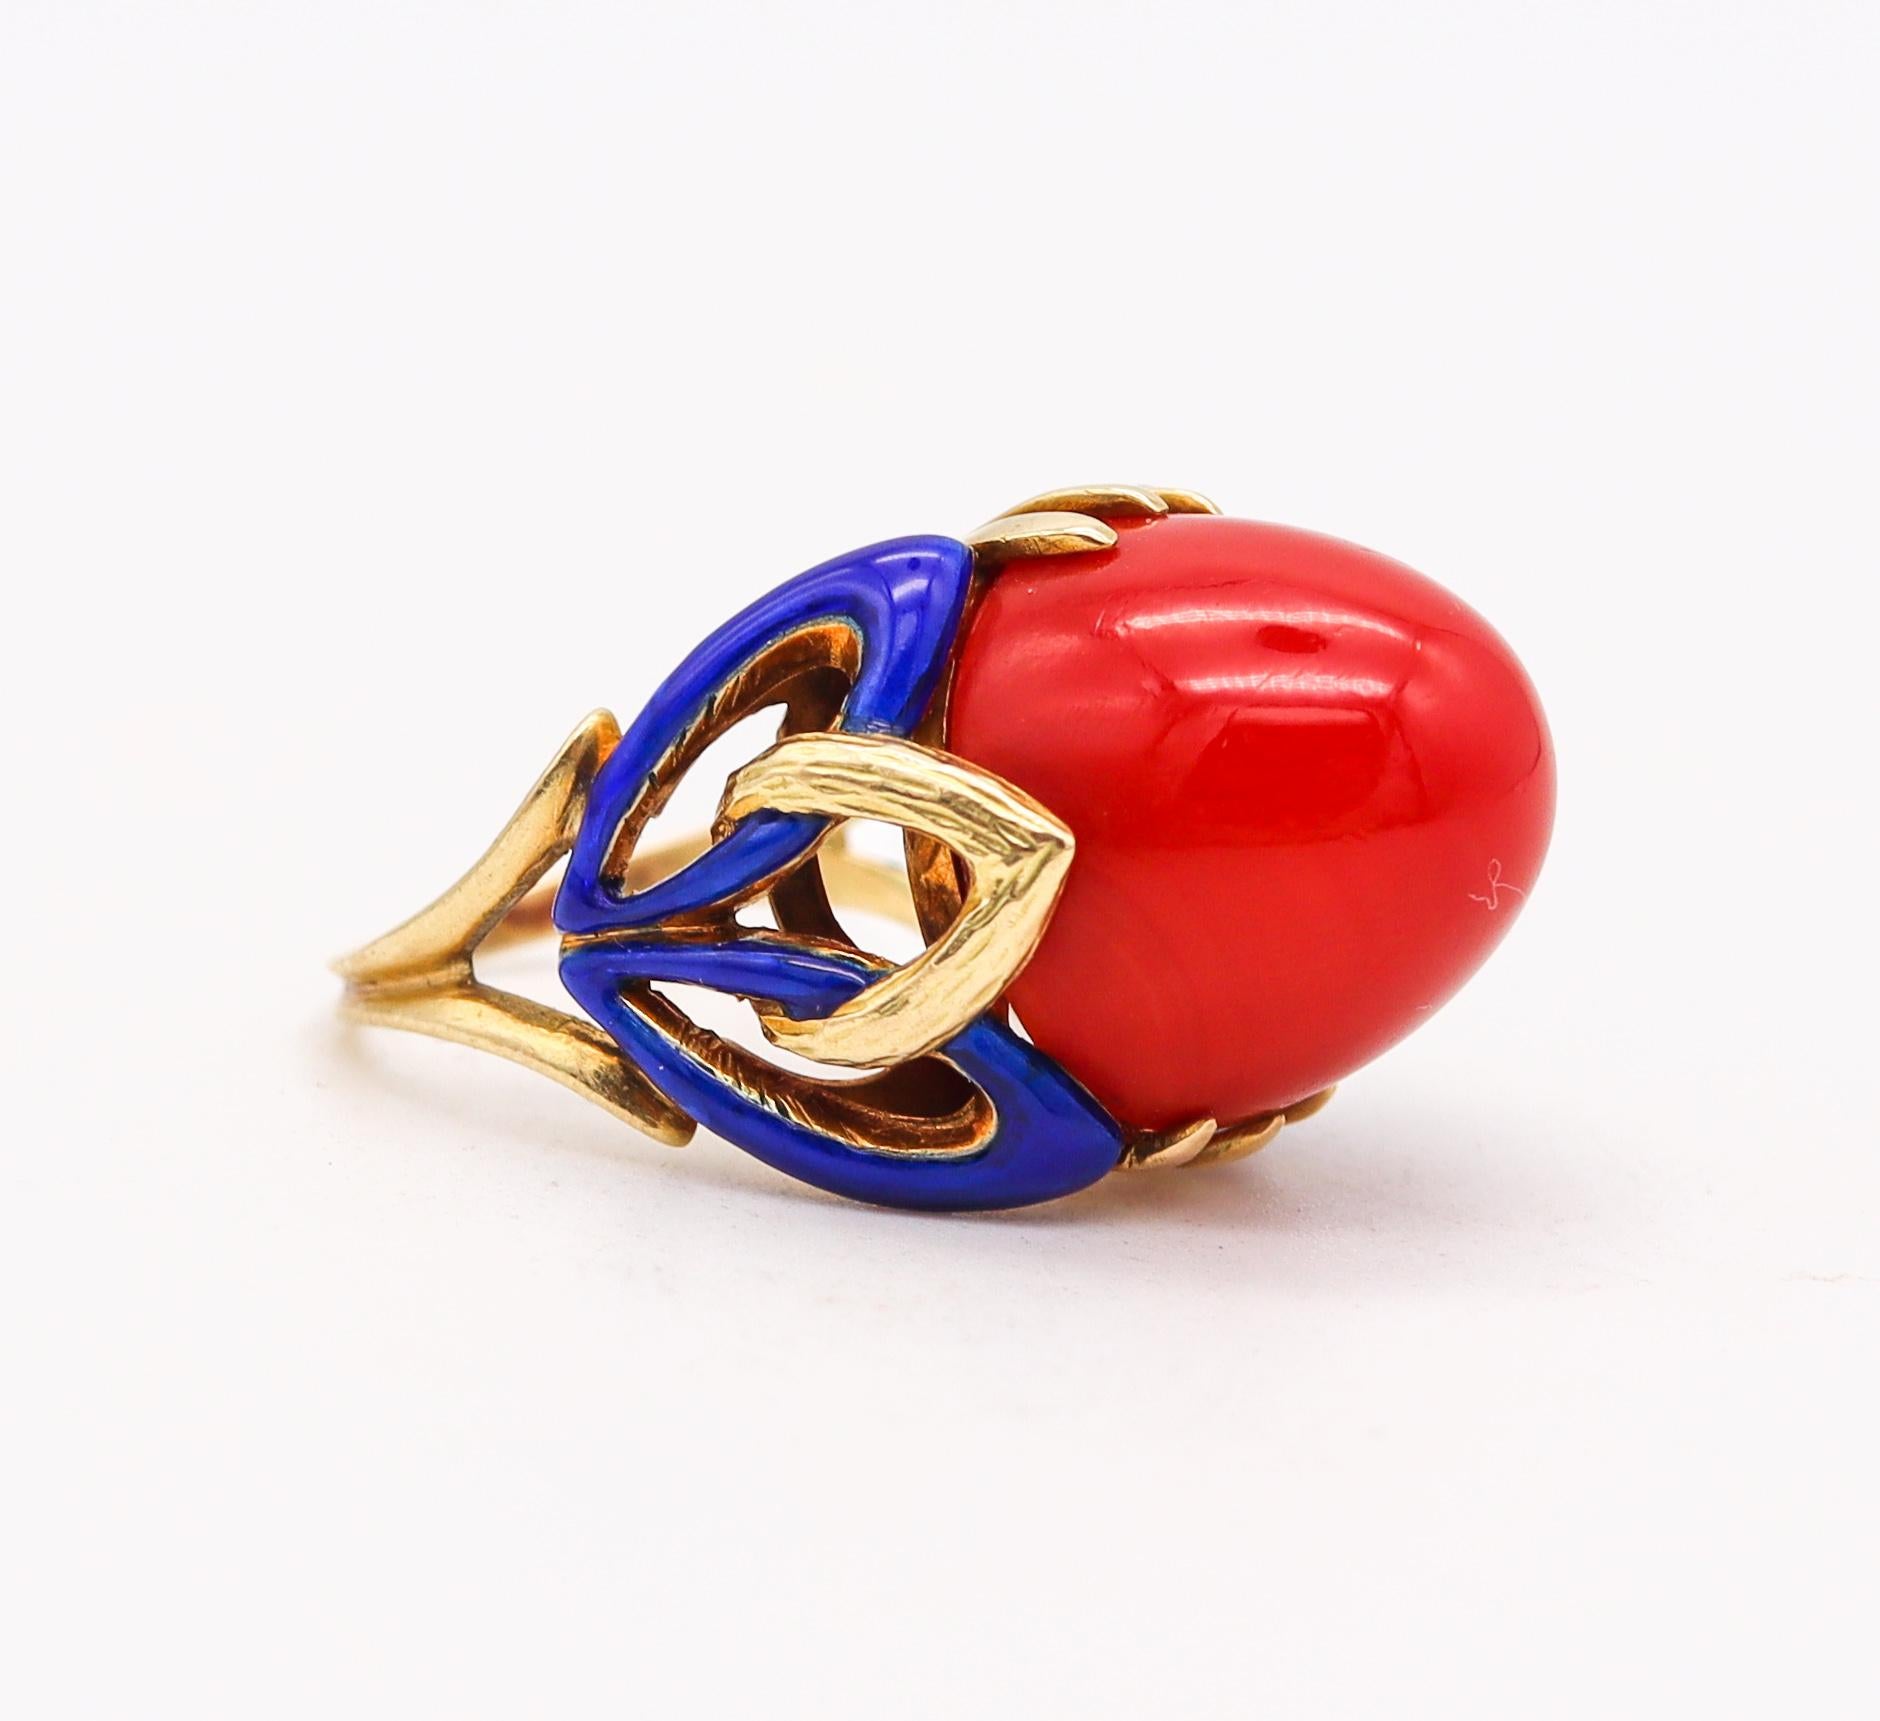 European art deco cocktail ring.

A beautiful colorful transitional piece, created in Europe during the late art deco and the early retro periods, back in the 1930's. This unusual highly collectible cocktail ring has been crafted in solid yellow